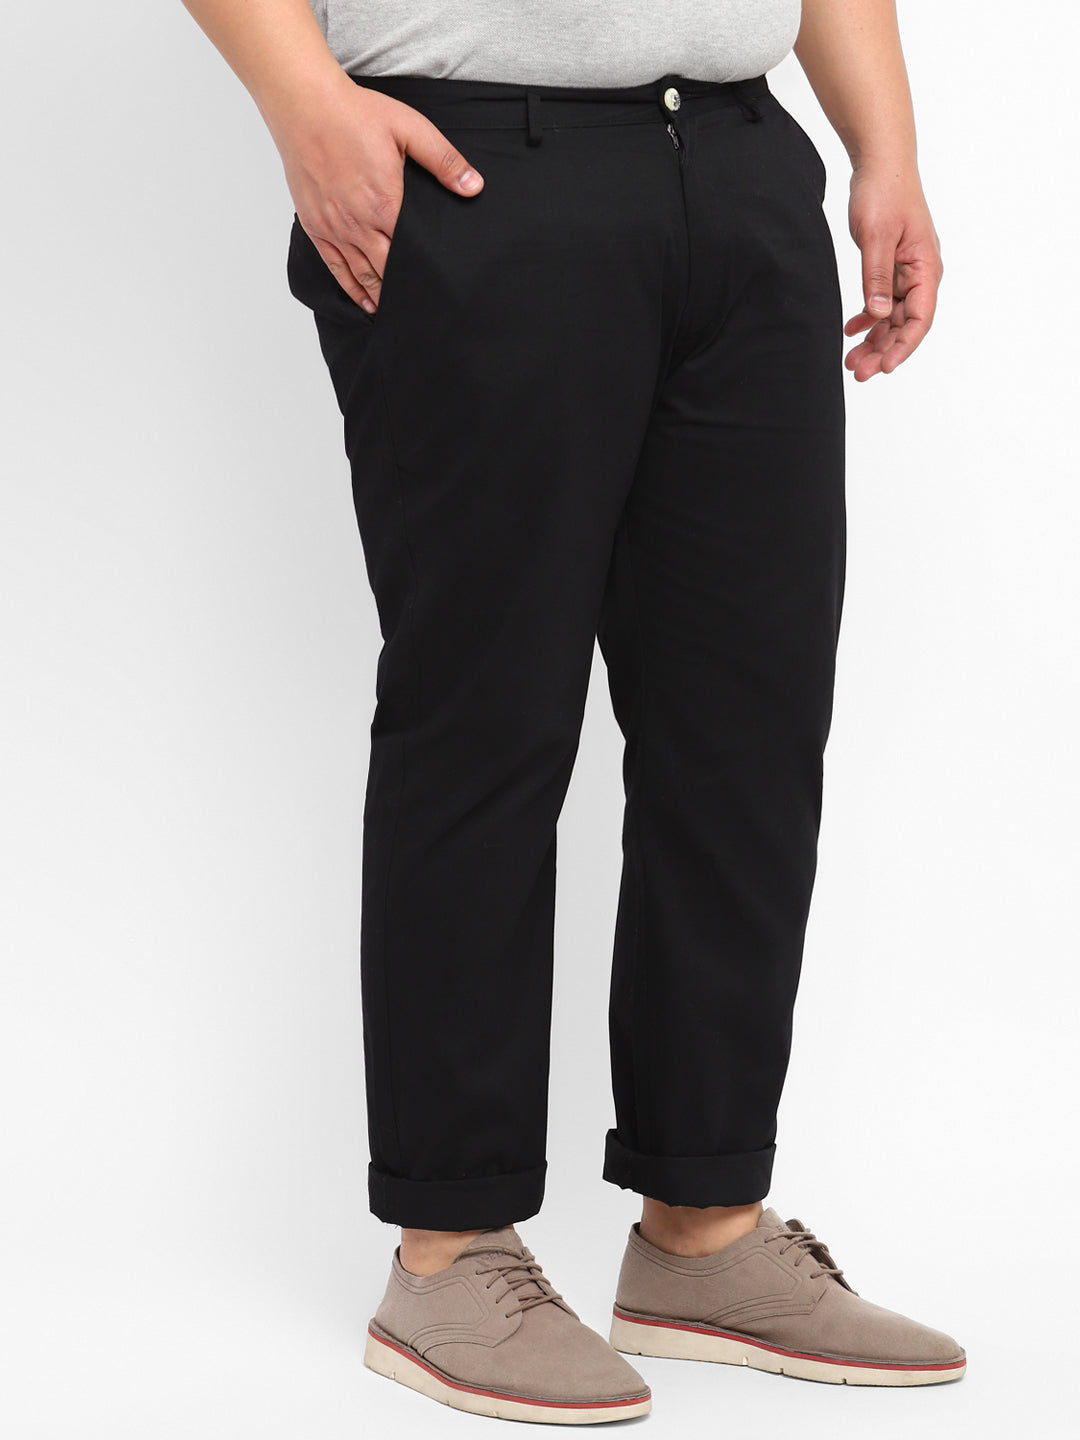 Urbano Plus Men's Black Cotton Light Weight Non-Stretch Regular Fit Casual Trousers